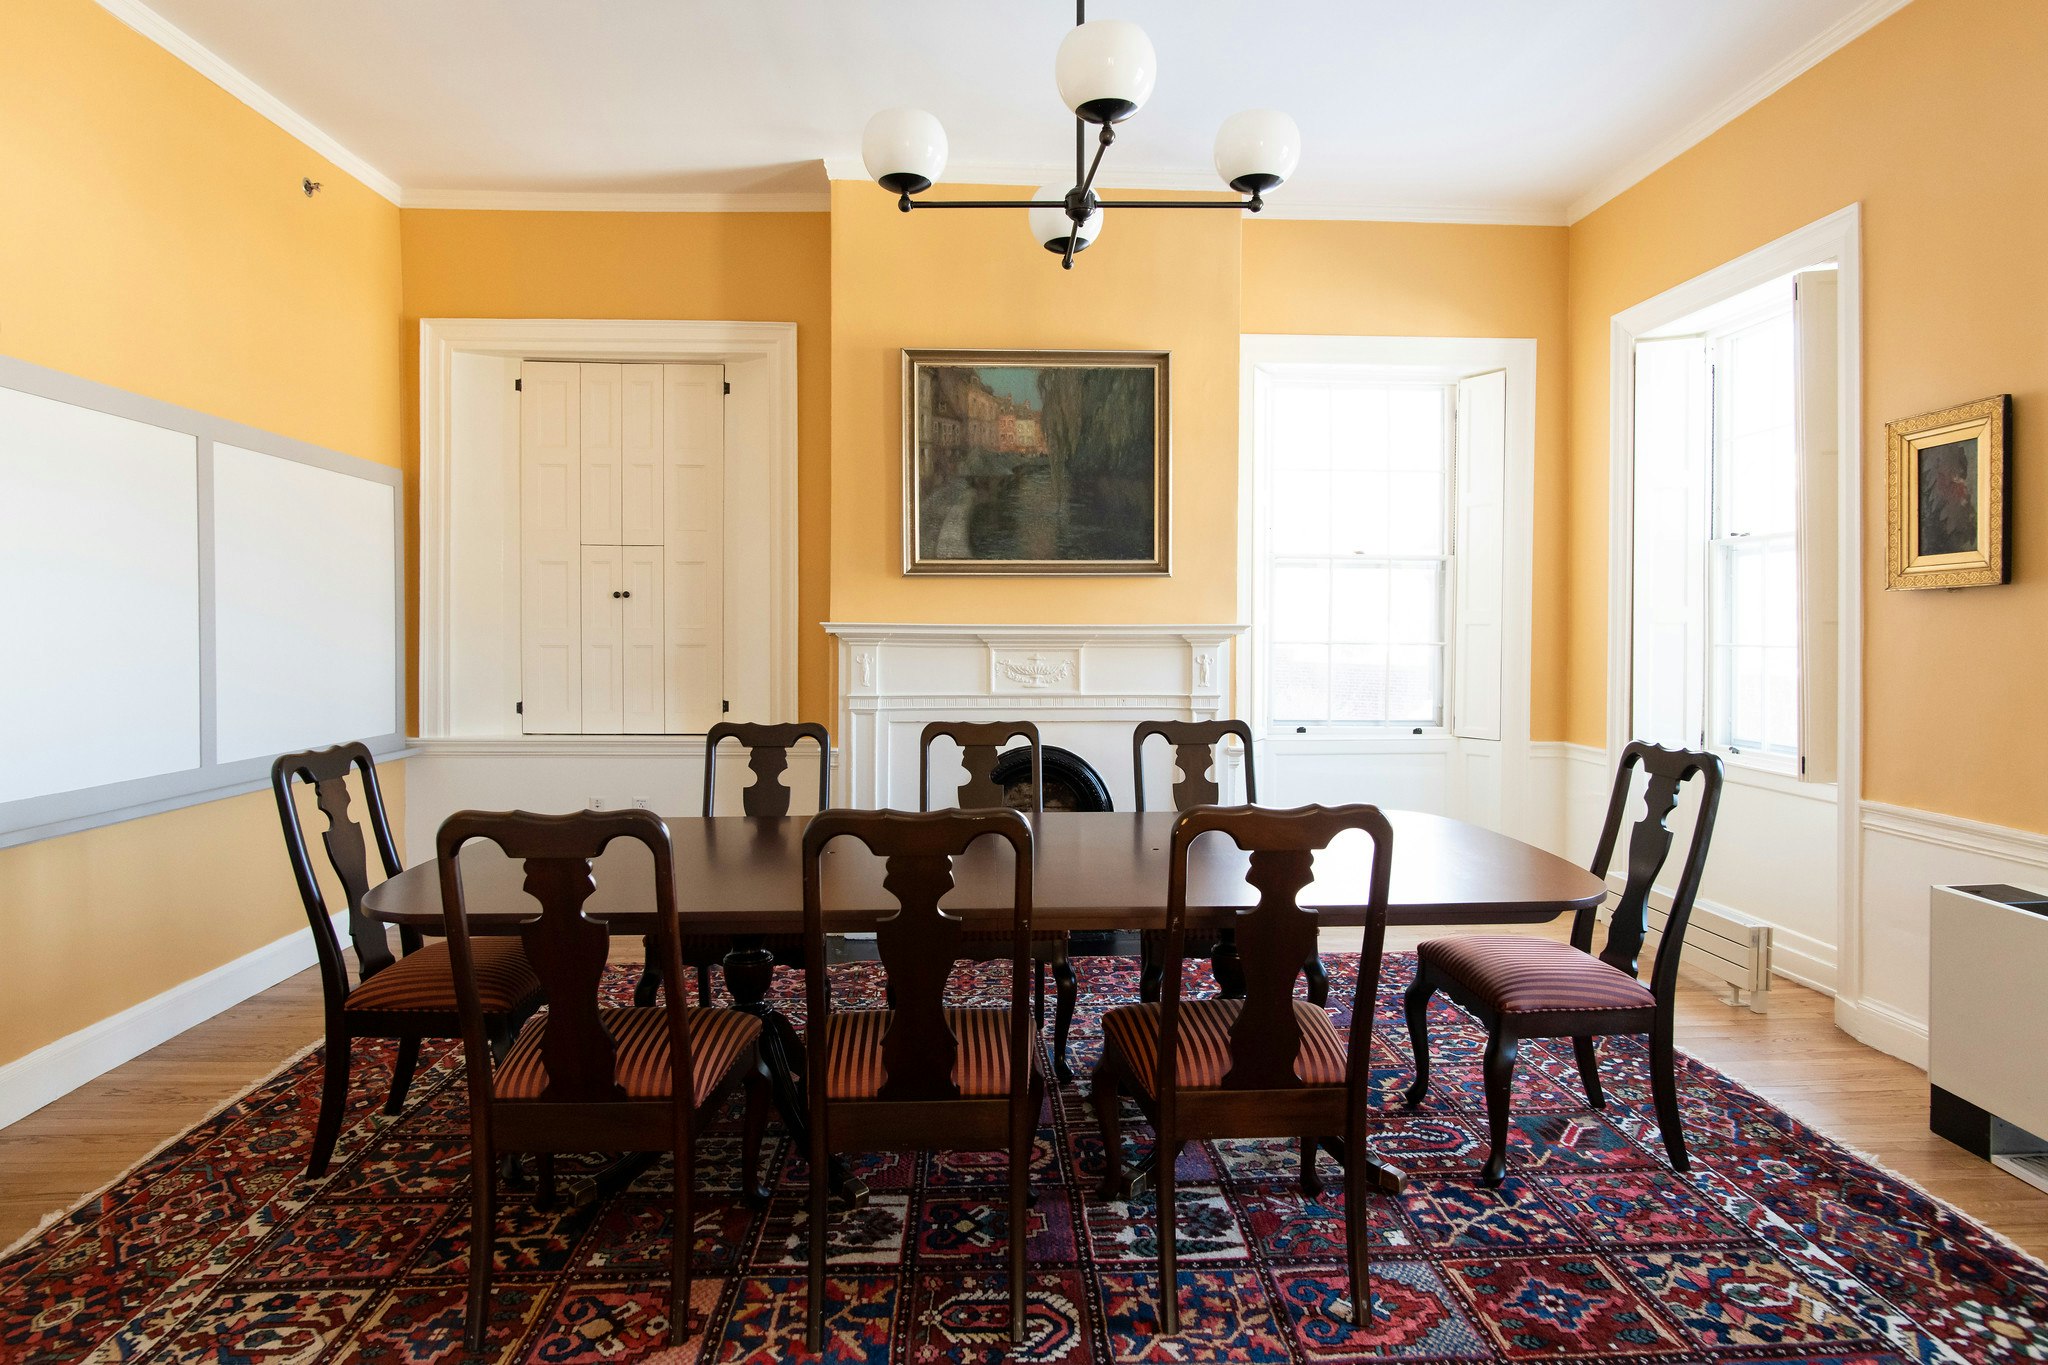 View from the entrance, dark brown wood conference table with 8 seats lined around. Fireplace and painting are on the other side of the room, behind the conference table. Walls are yellow.